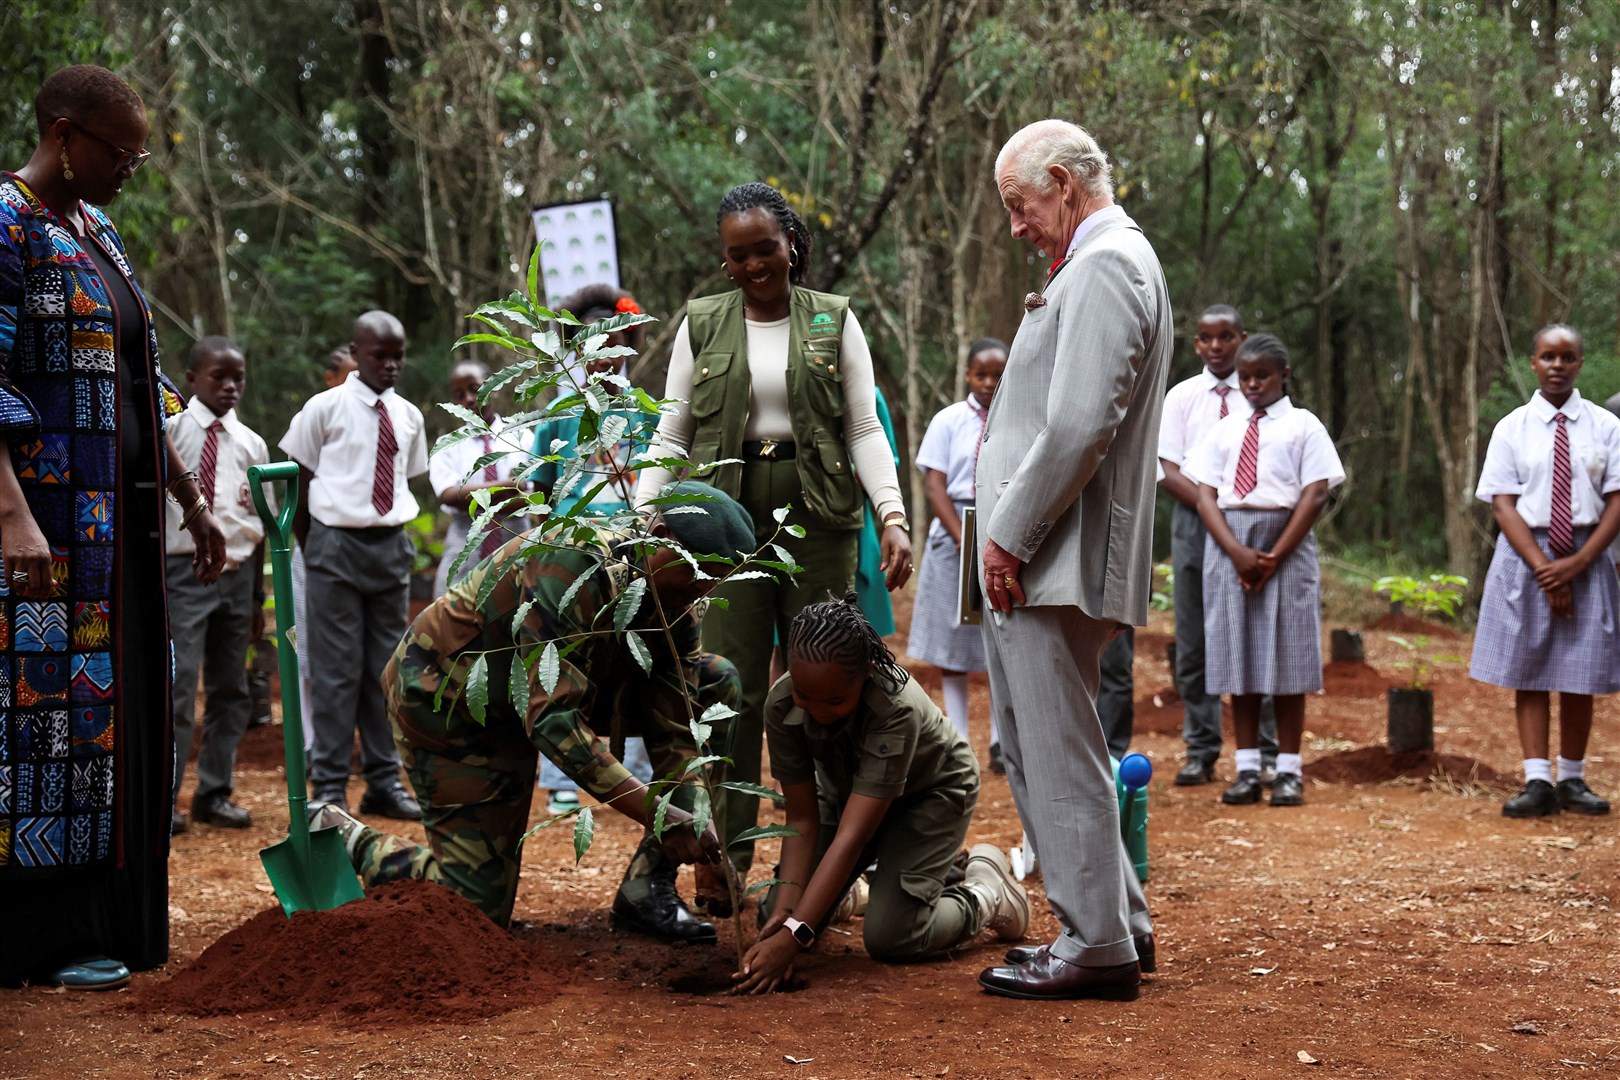 Charles plants a tree with young environmental activist Karen Kimani during a visit to the Karura Forest in Nairobi (Phil Noble/PA)